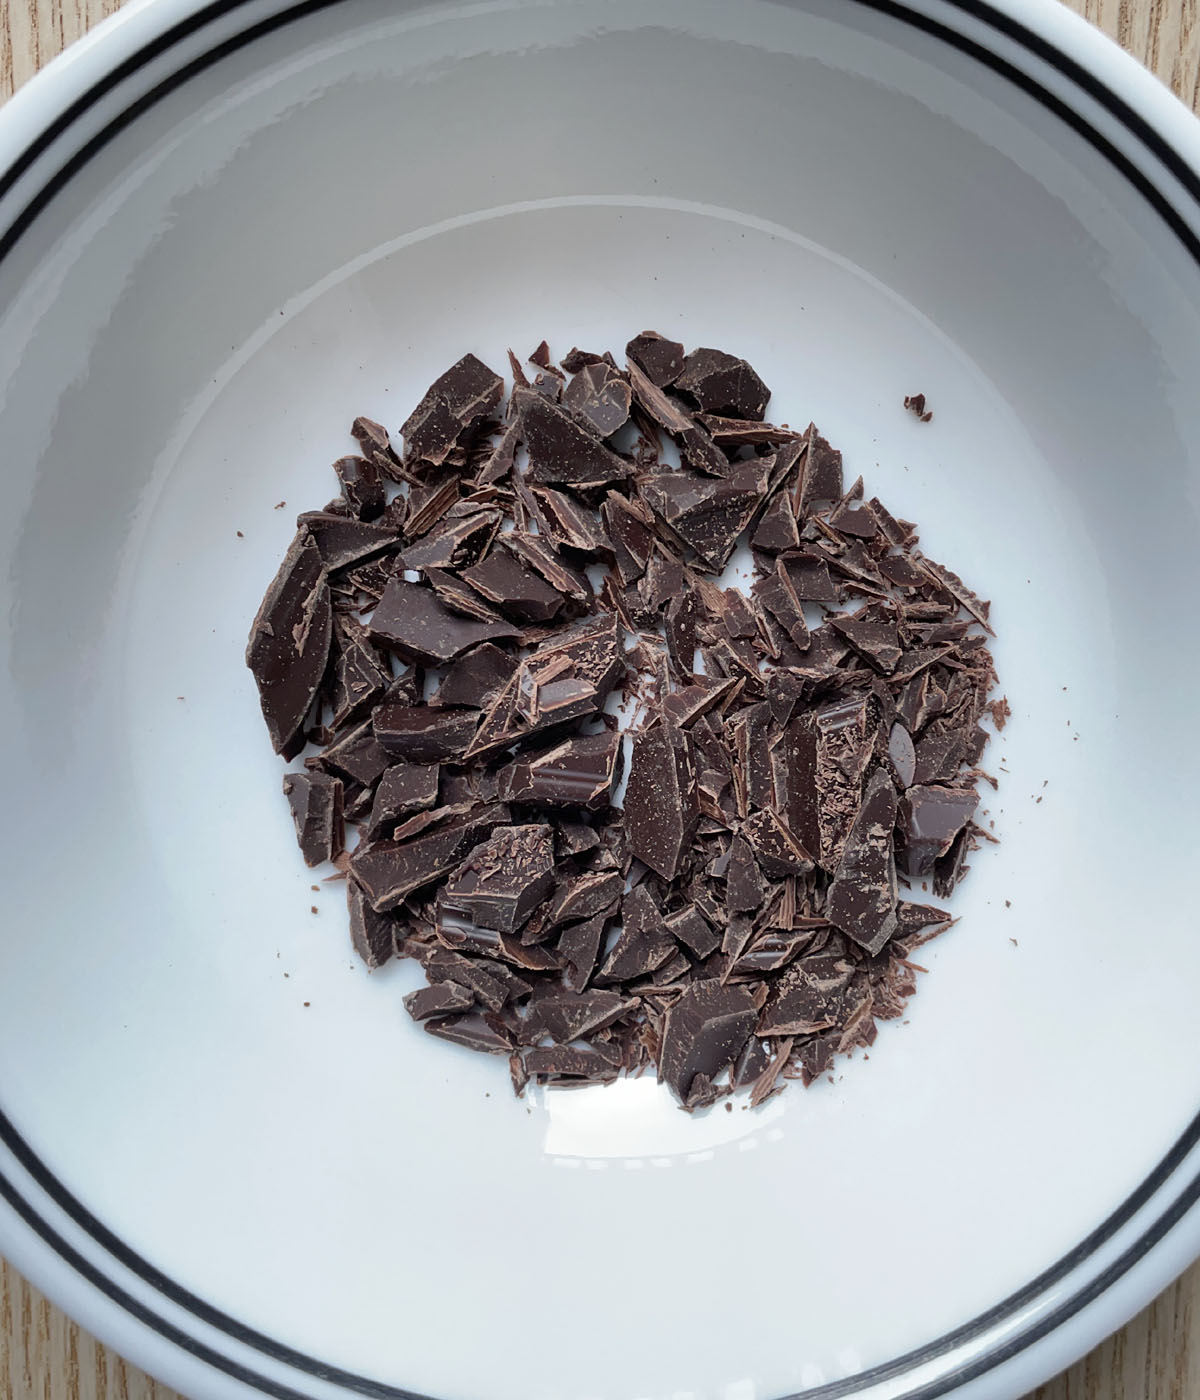 A white round bowl containing finely chopped chocolate.